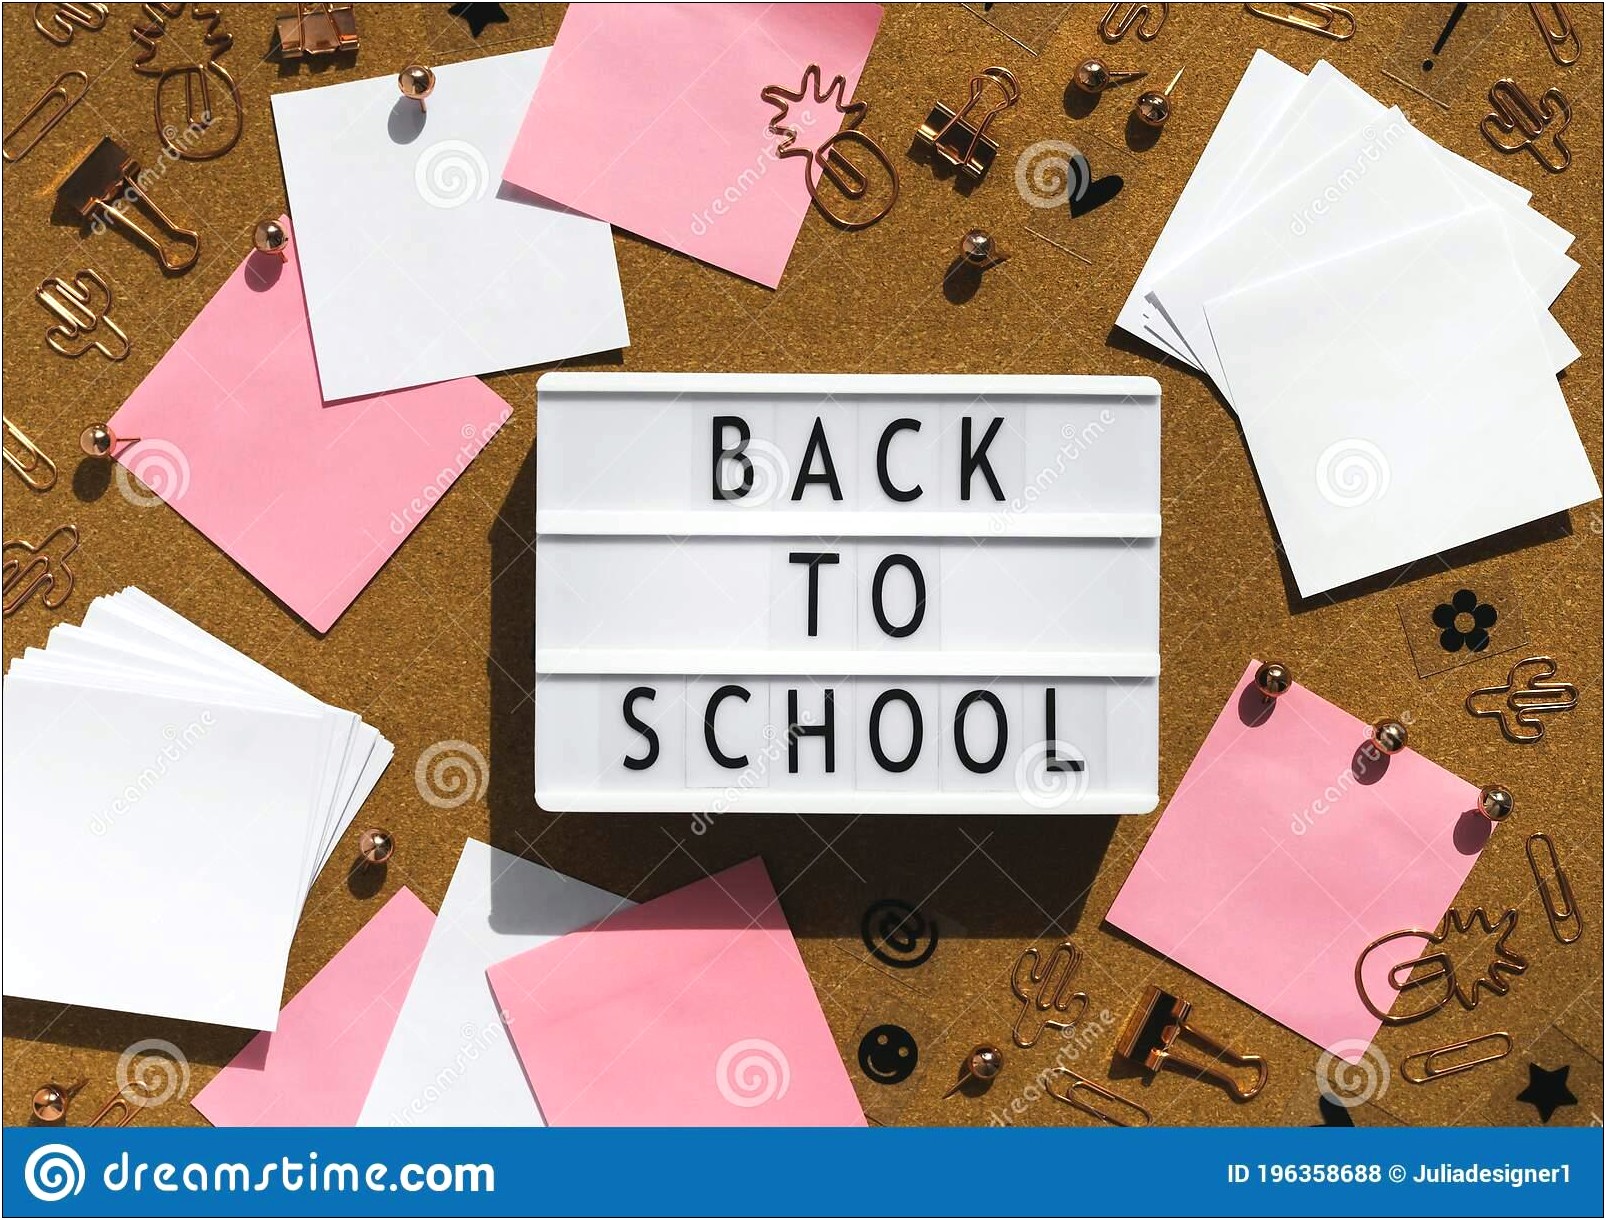 free-back-to-school-letter-templates-templates-resume-designs